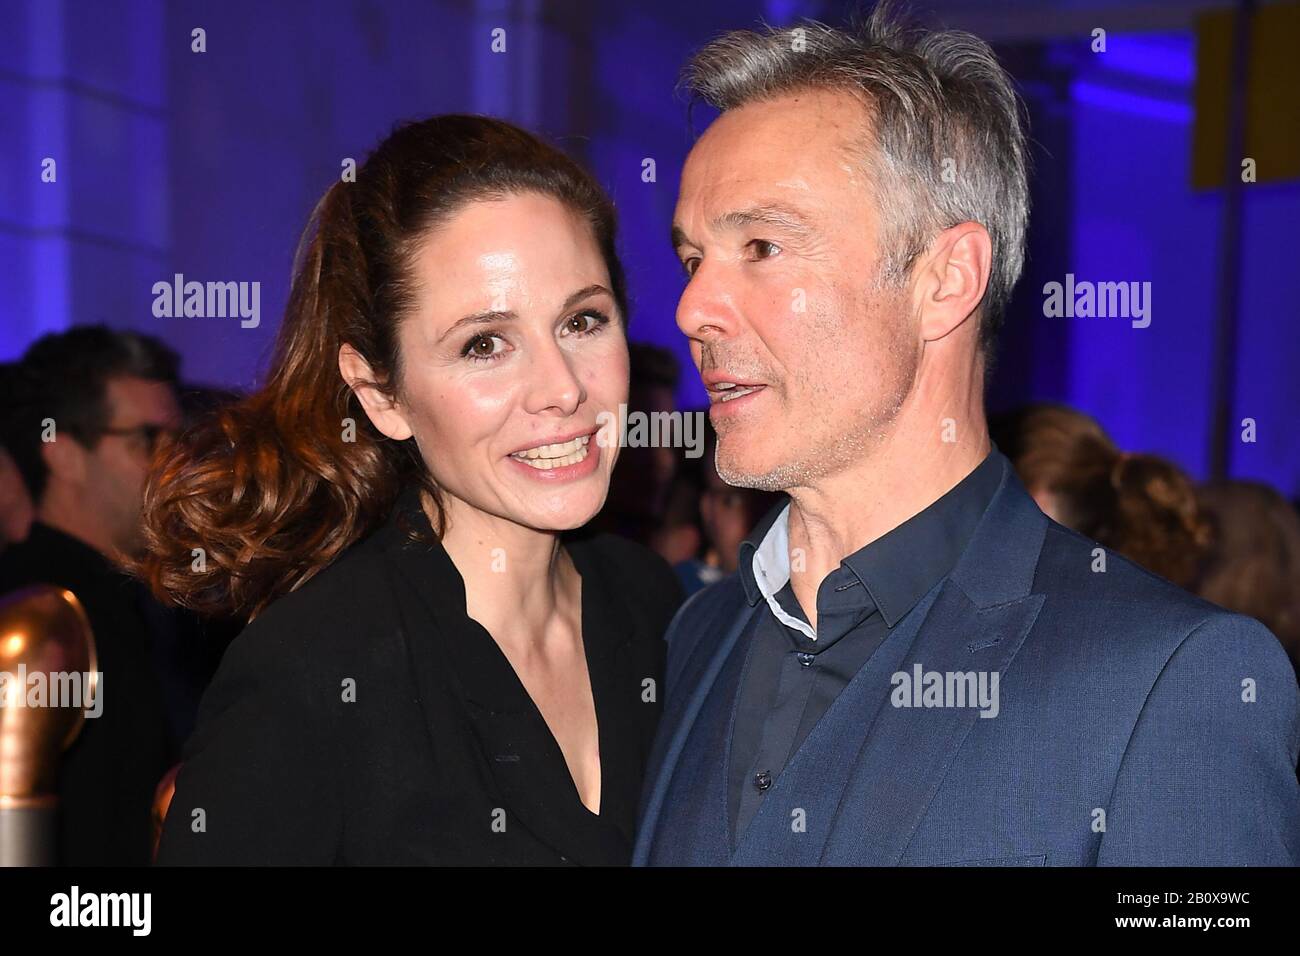 Berlin, Germany. 21st Feb, 2020. 70th Berlinale, Party Blue Hour: Actor Hannes Jaenicke and actress Ellenie Salvo Gonzalez. The International Film Festival takes place from 20.02. to 01.03.2020. Credit: Britta Pedersen/dpa-zentralbild/dpa/Alamy Live News Stock Photo